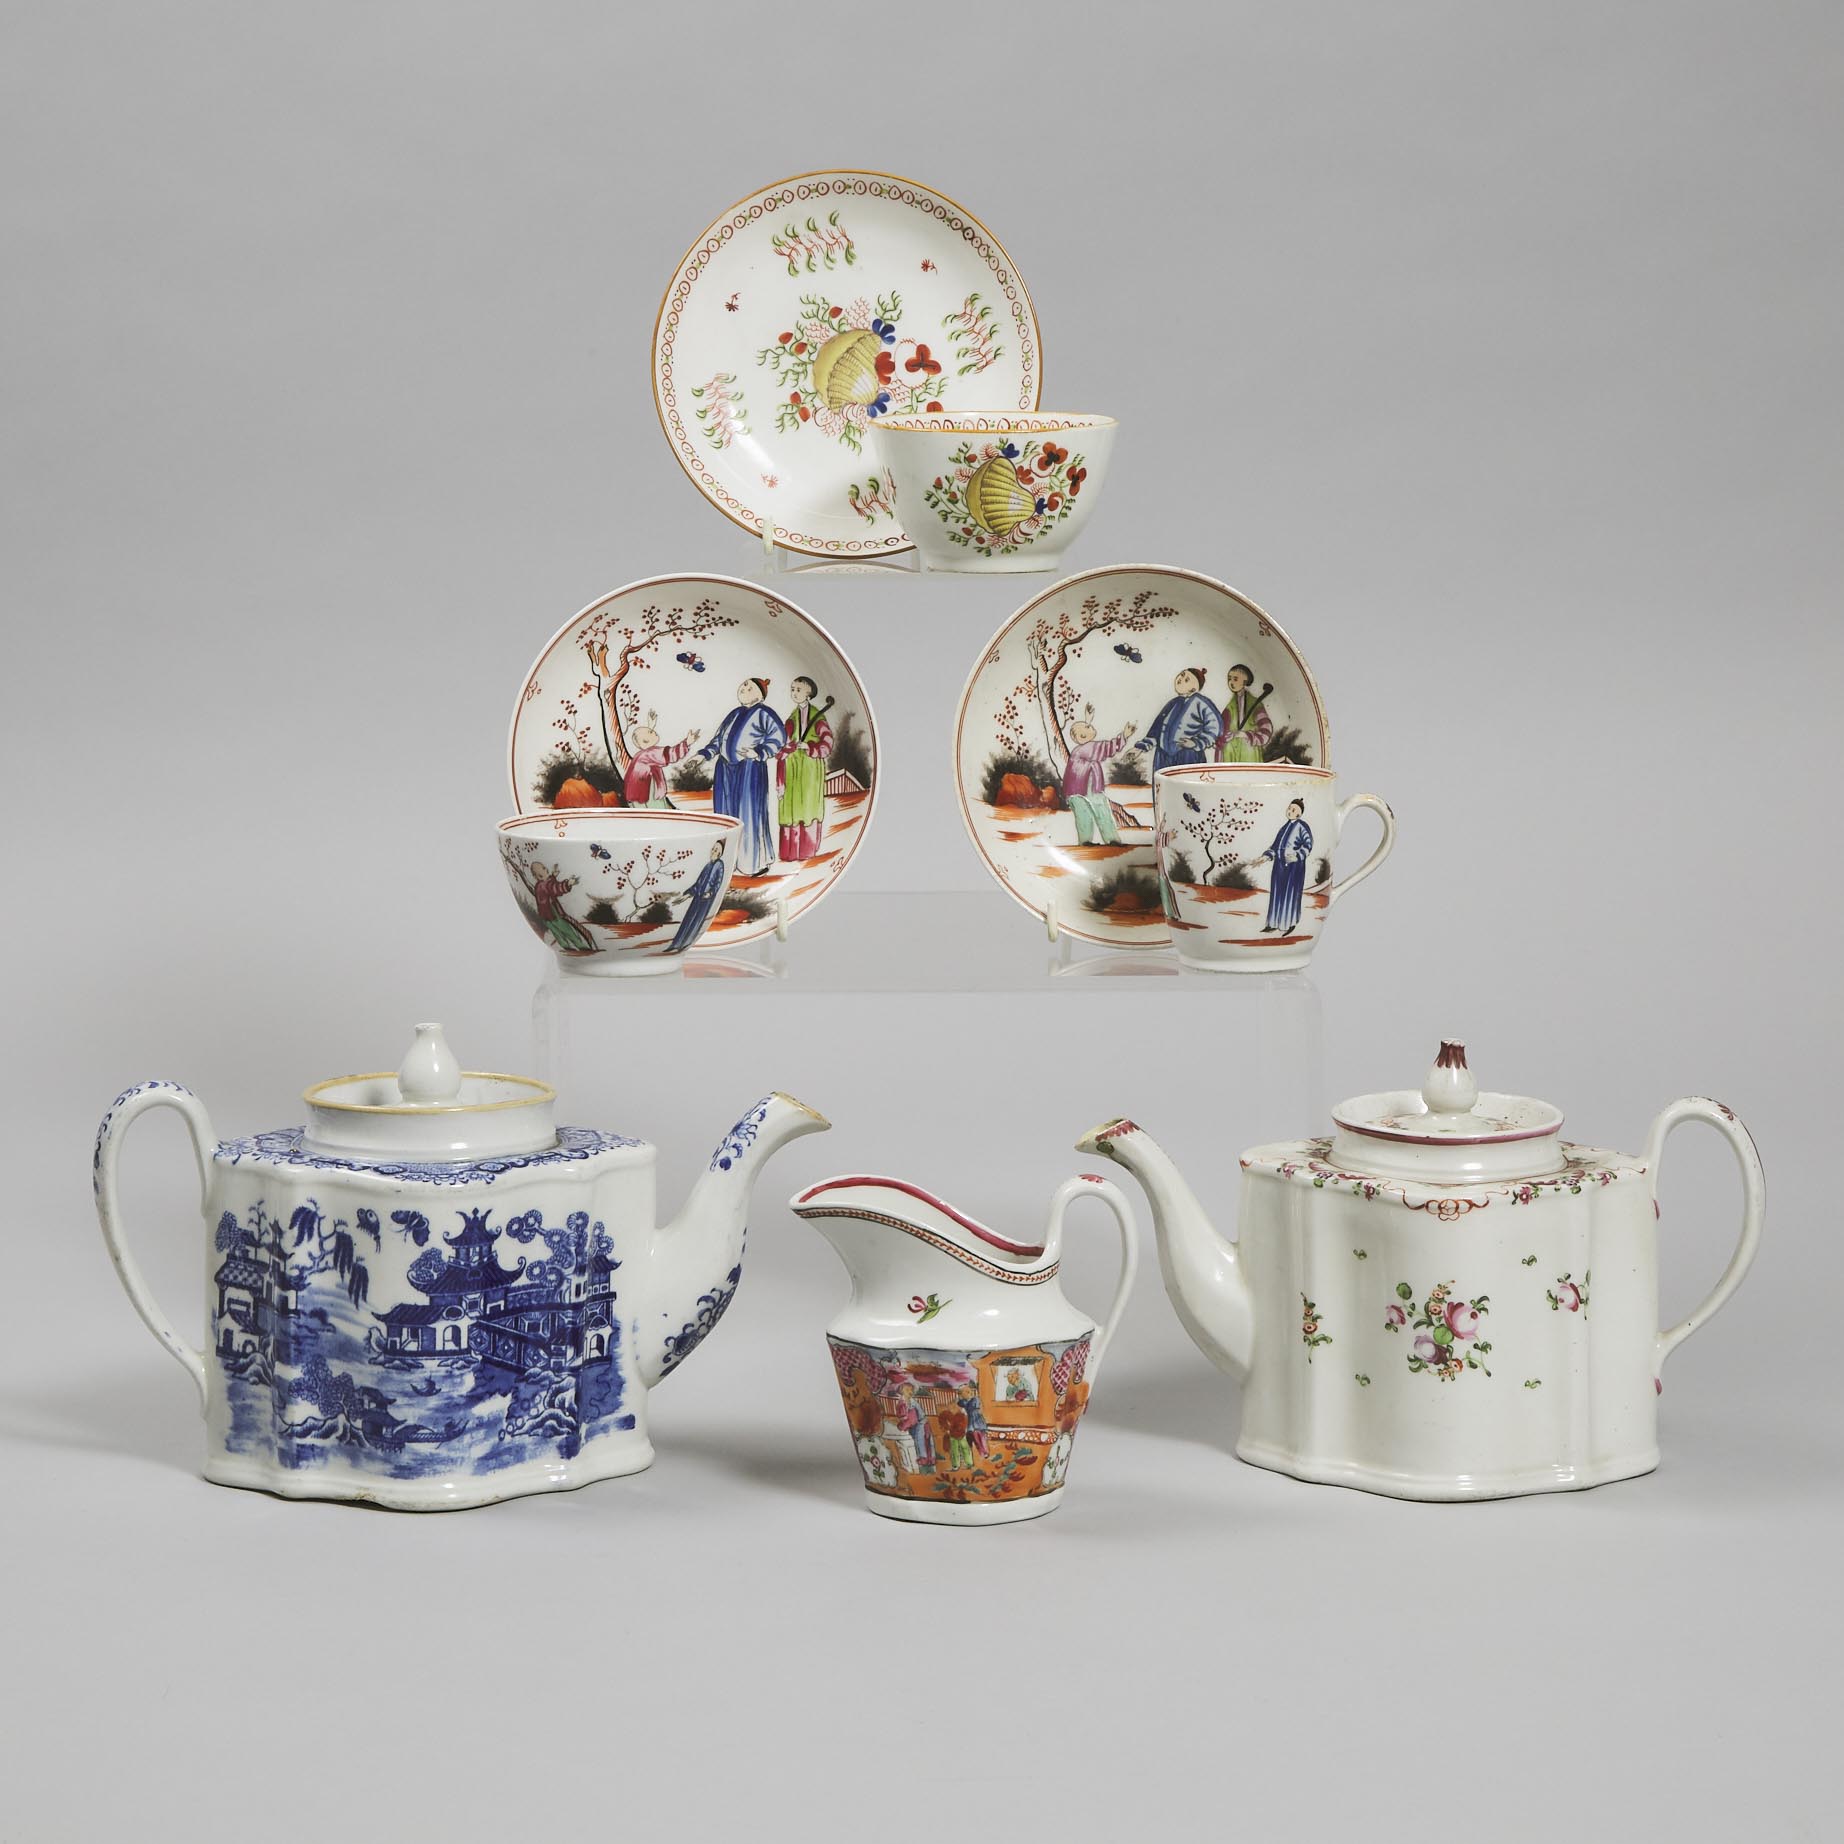 Group of New Hall Tea Wares, late 18th/early 19th century